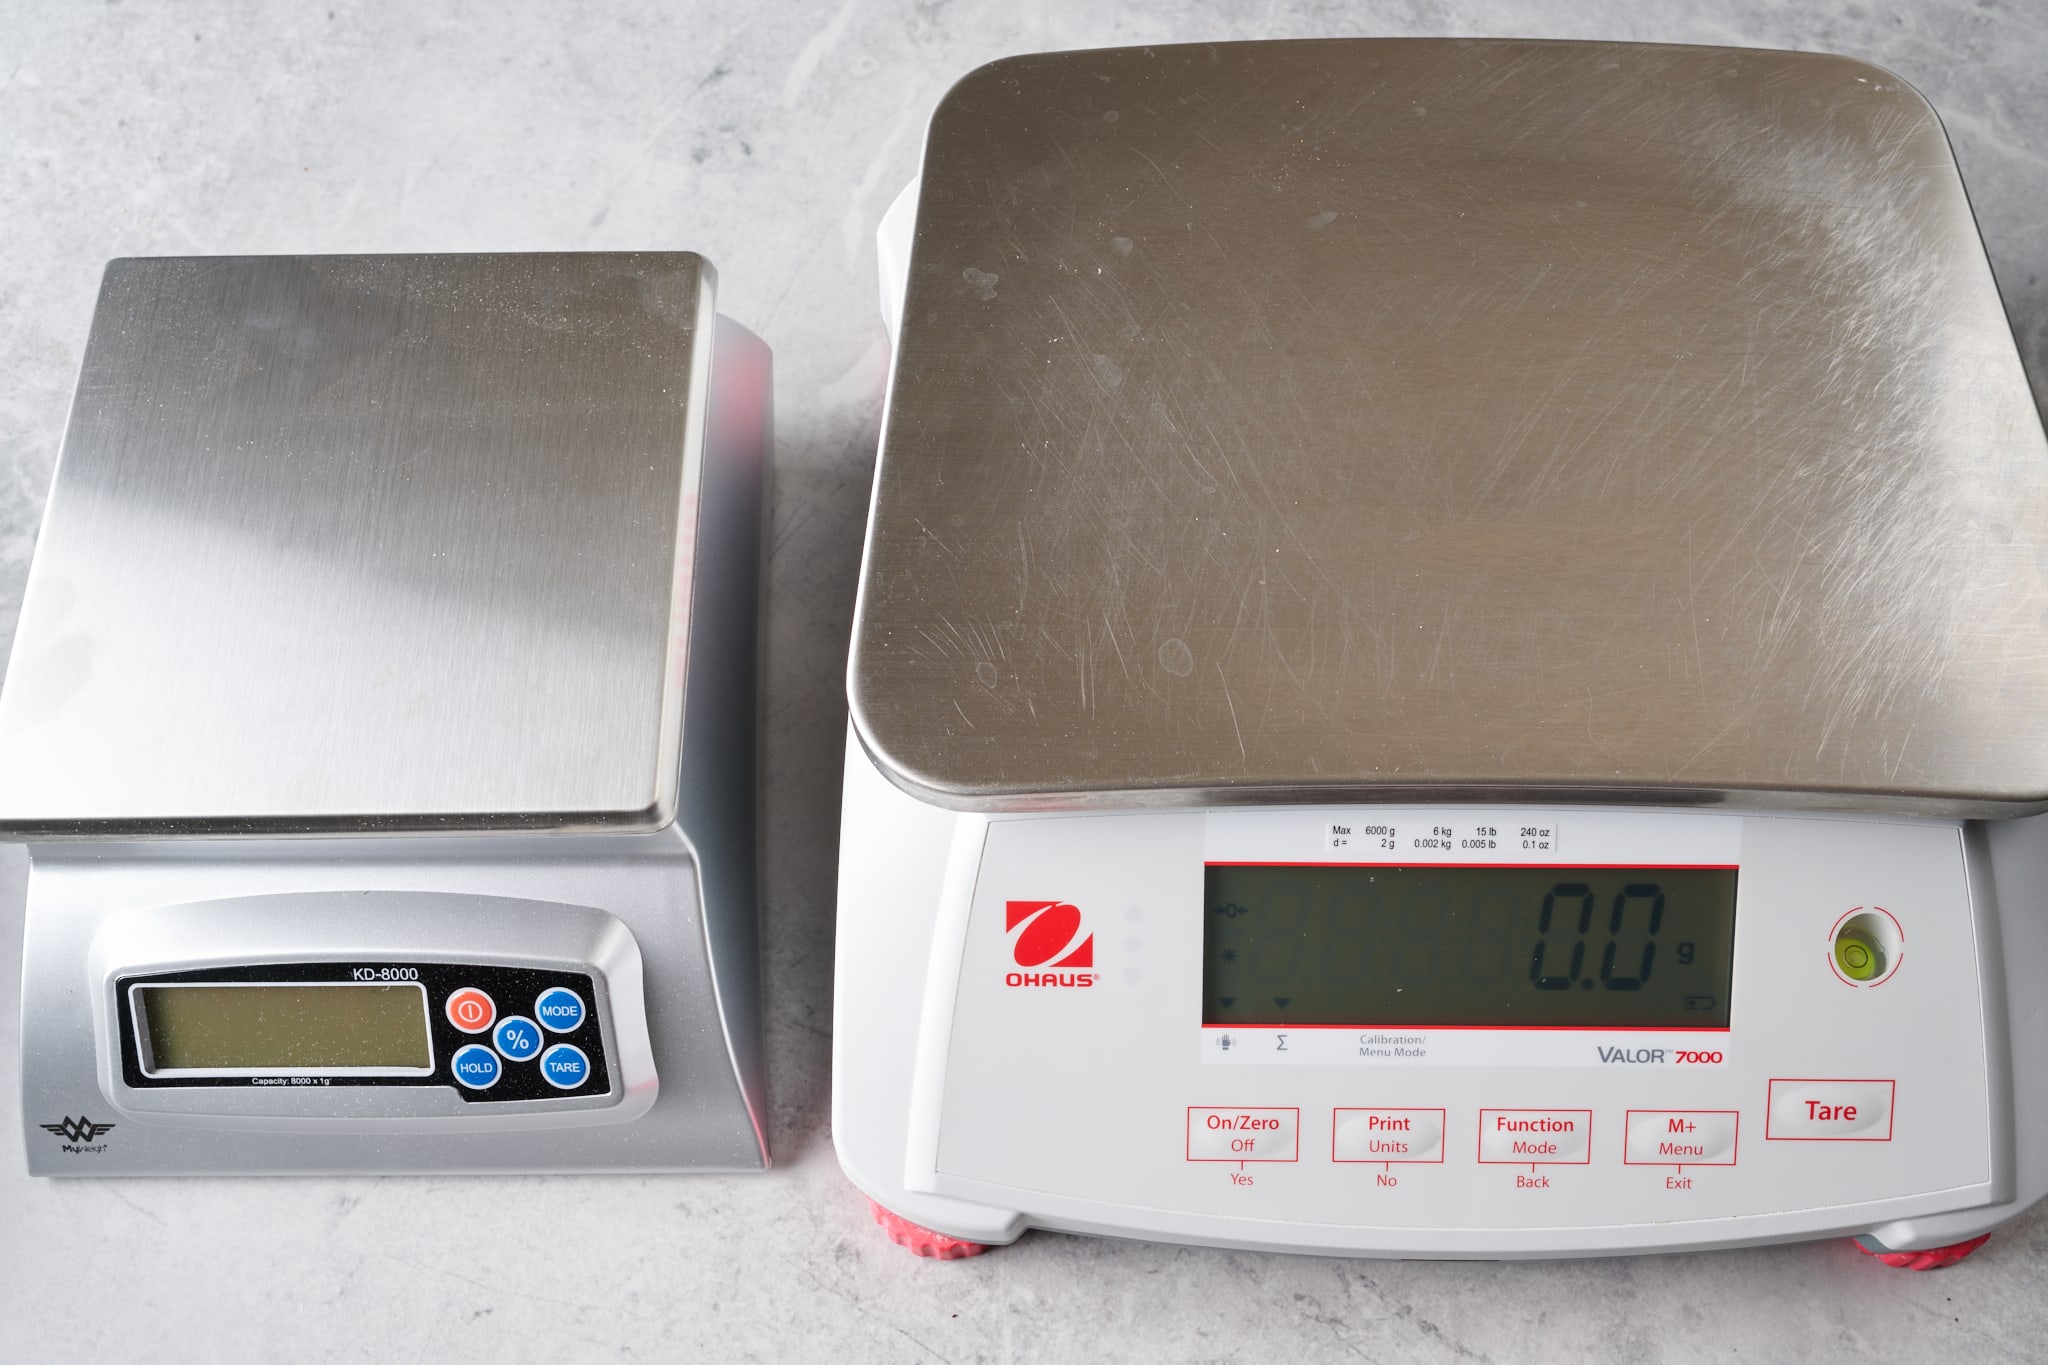 https://www.theperfectloaf.com/wp-content/uploads/2023/01/theperfectloaf_best_kitchen_scale_for_making_bread_ohaus.jpg